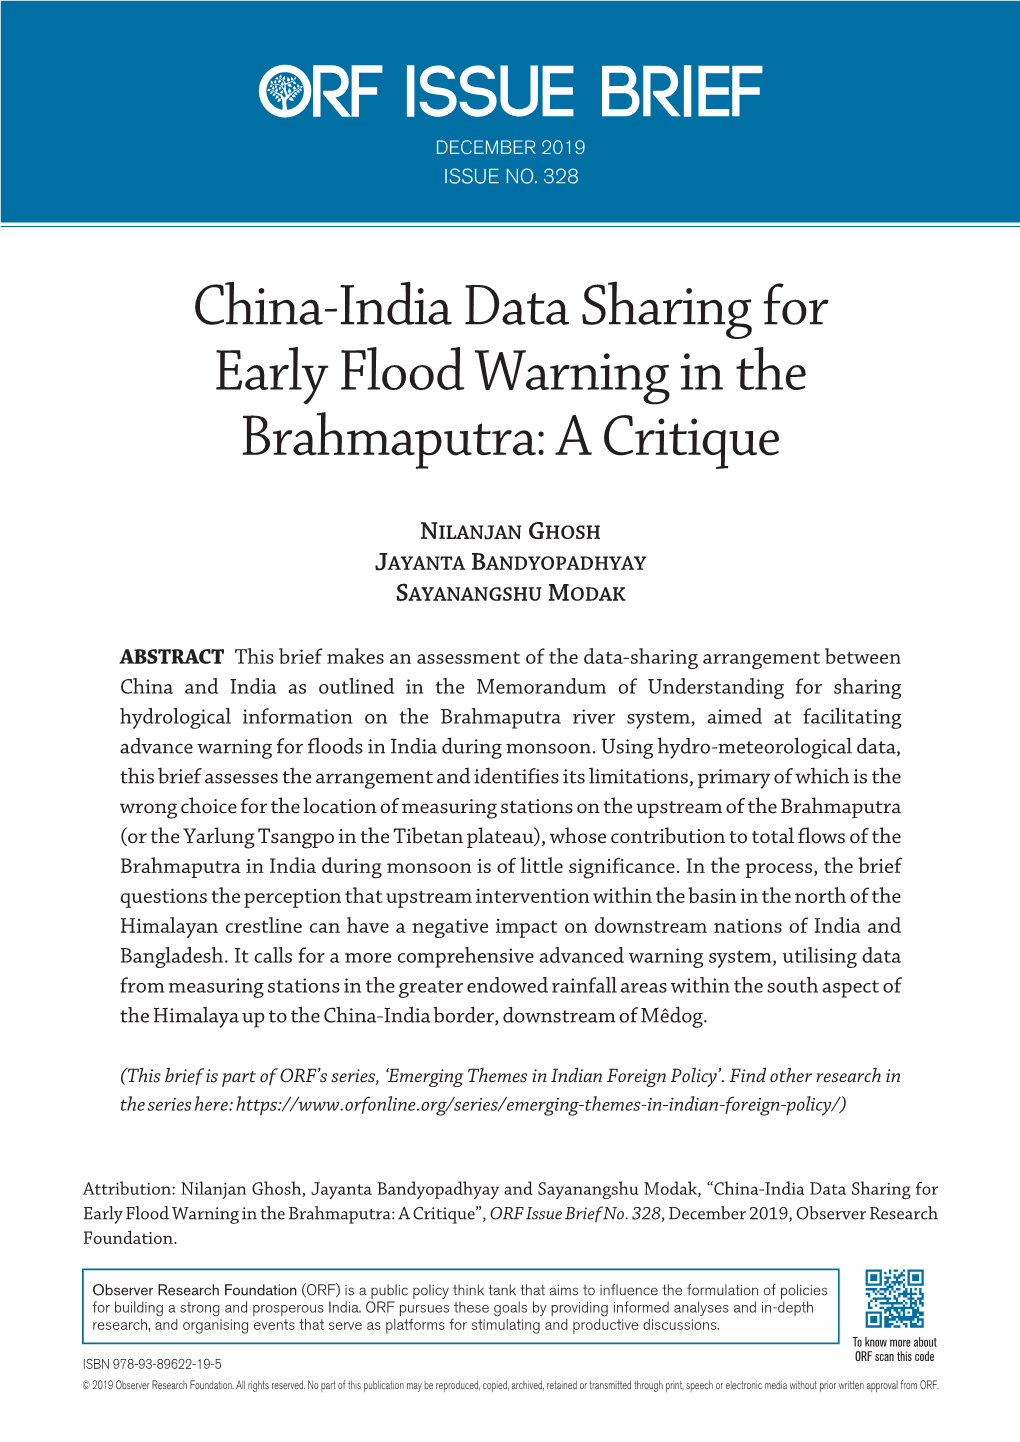 China-India Data Sharing for Early Flood Warning in the Brahmaputra: a Critique